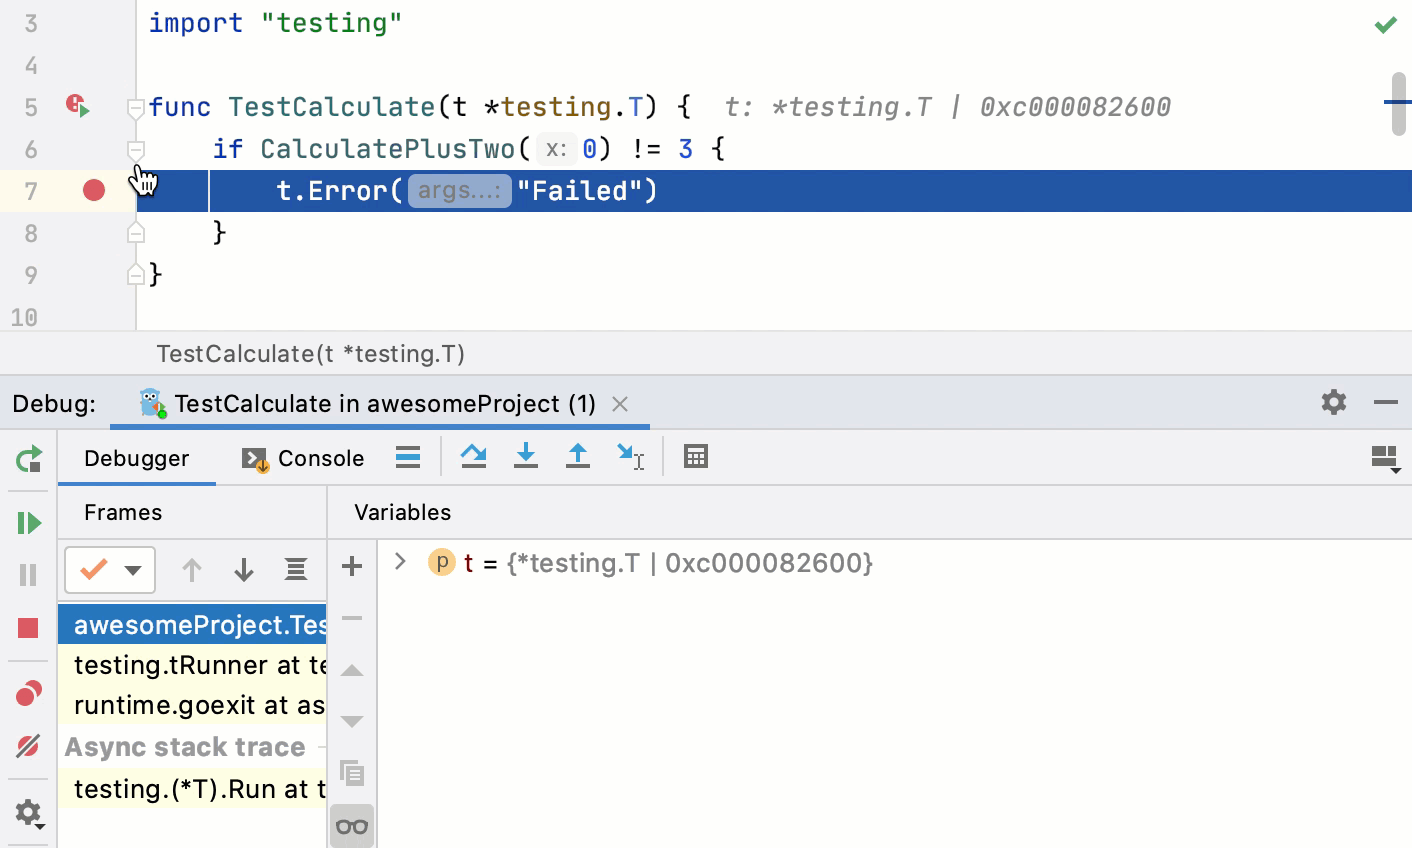 Debugging a test using the gutter icon